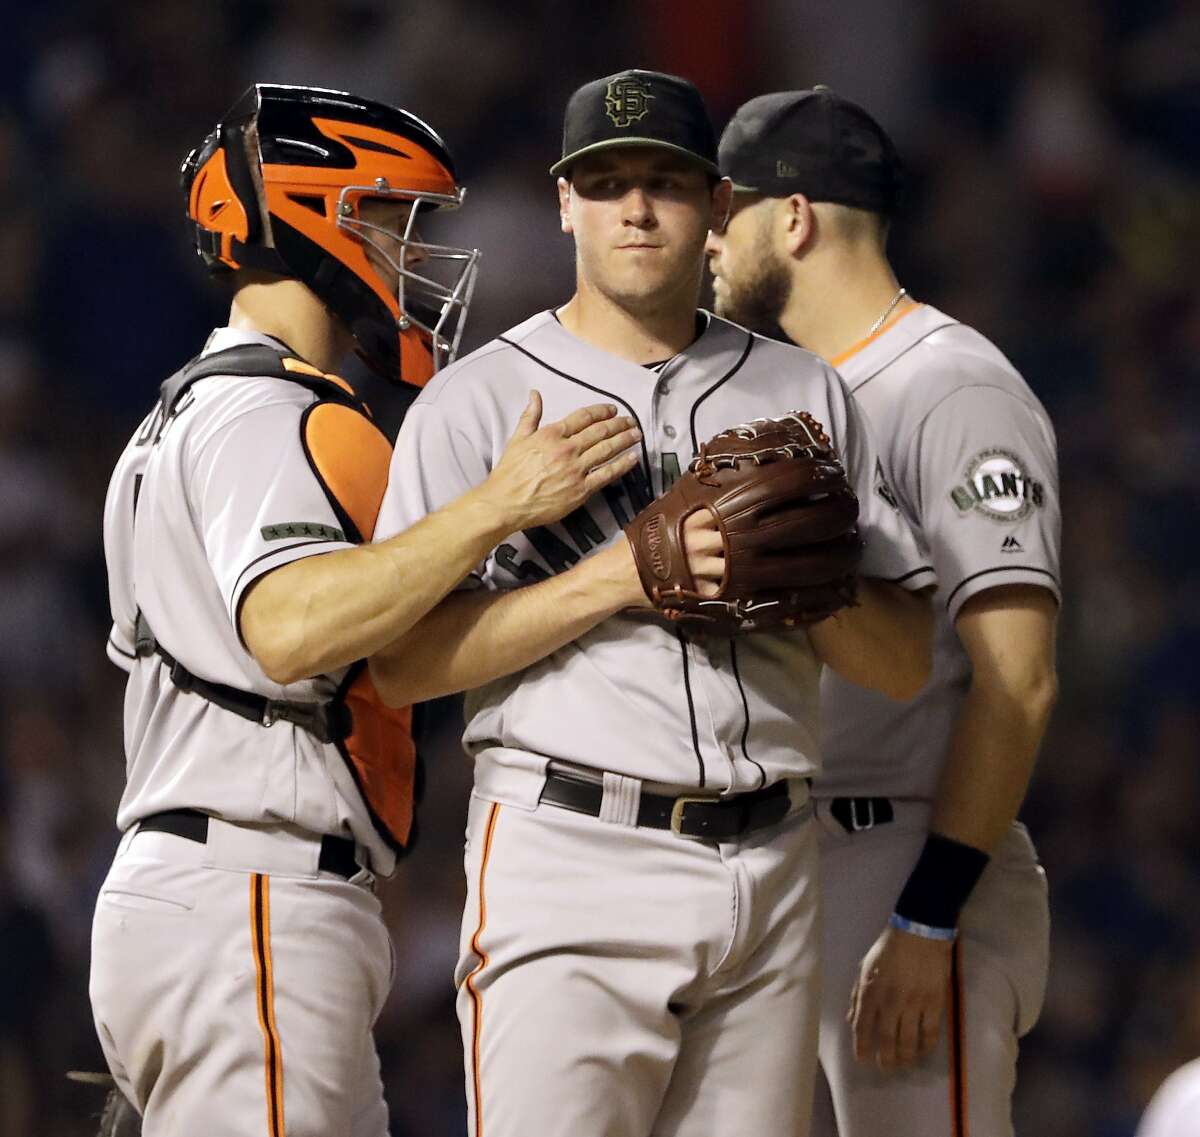 San Francisco Giants starting pitcher Ty Blach, center, reacts as he listens to catcher Nick Hundley, left, and third baseman Evan Longoria during the fourth inning of a baseball game against the Chicago Cubs in Chicago, Sunday, May 27, 2018. (AP Photo/Nam Y. Huh)